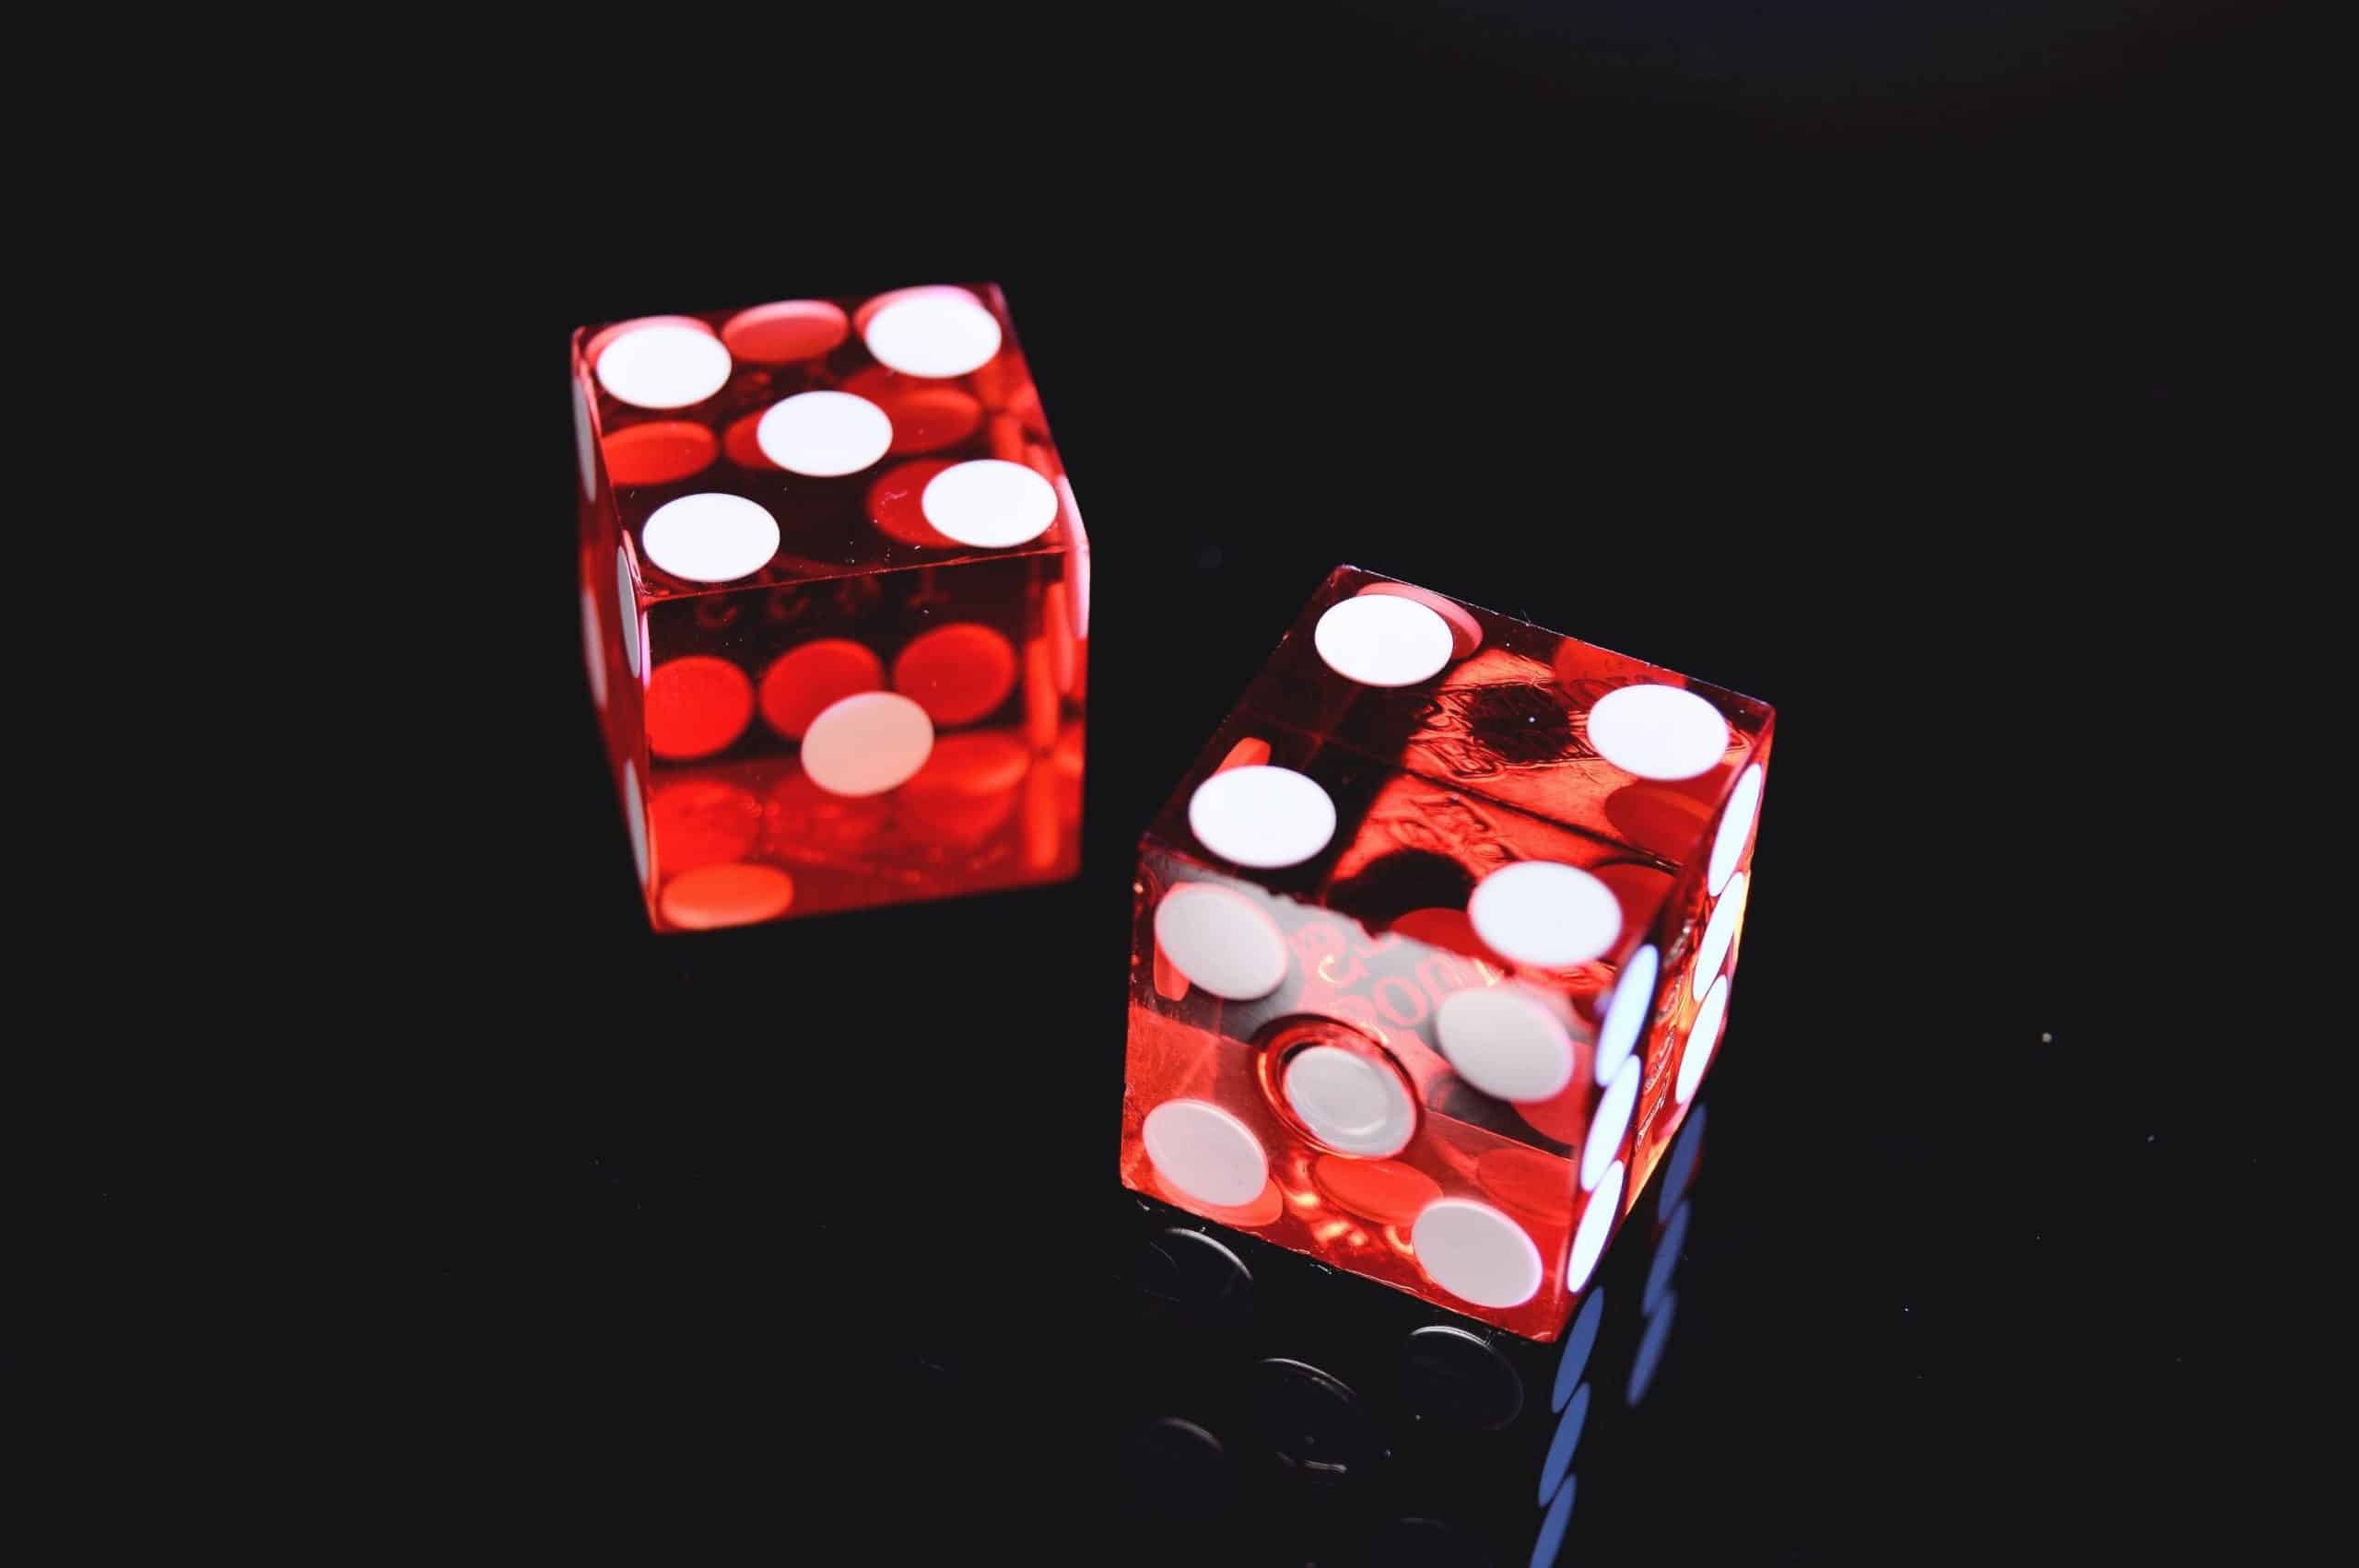 A pair of red dice on a black background